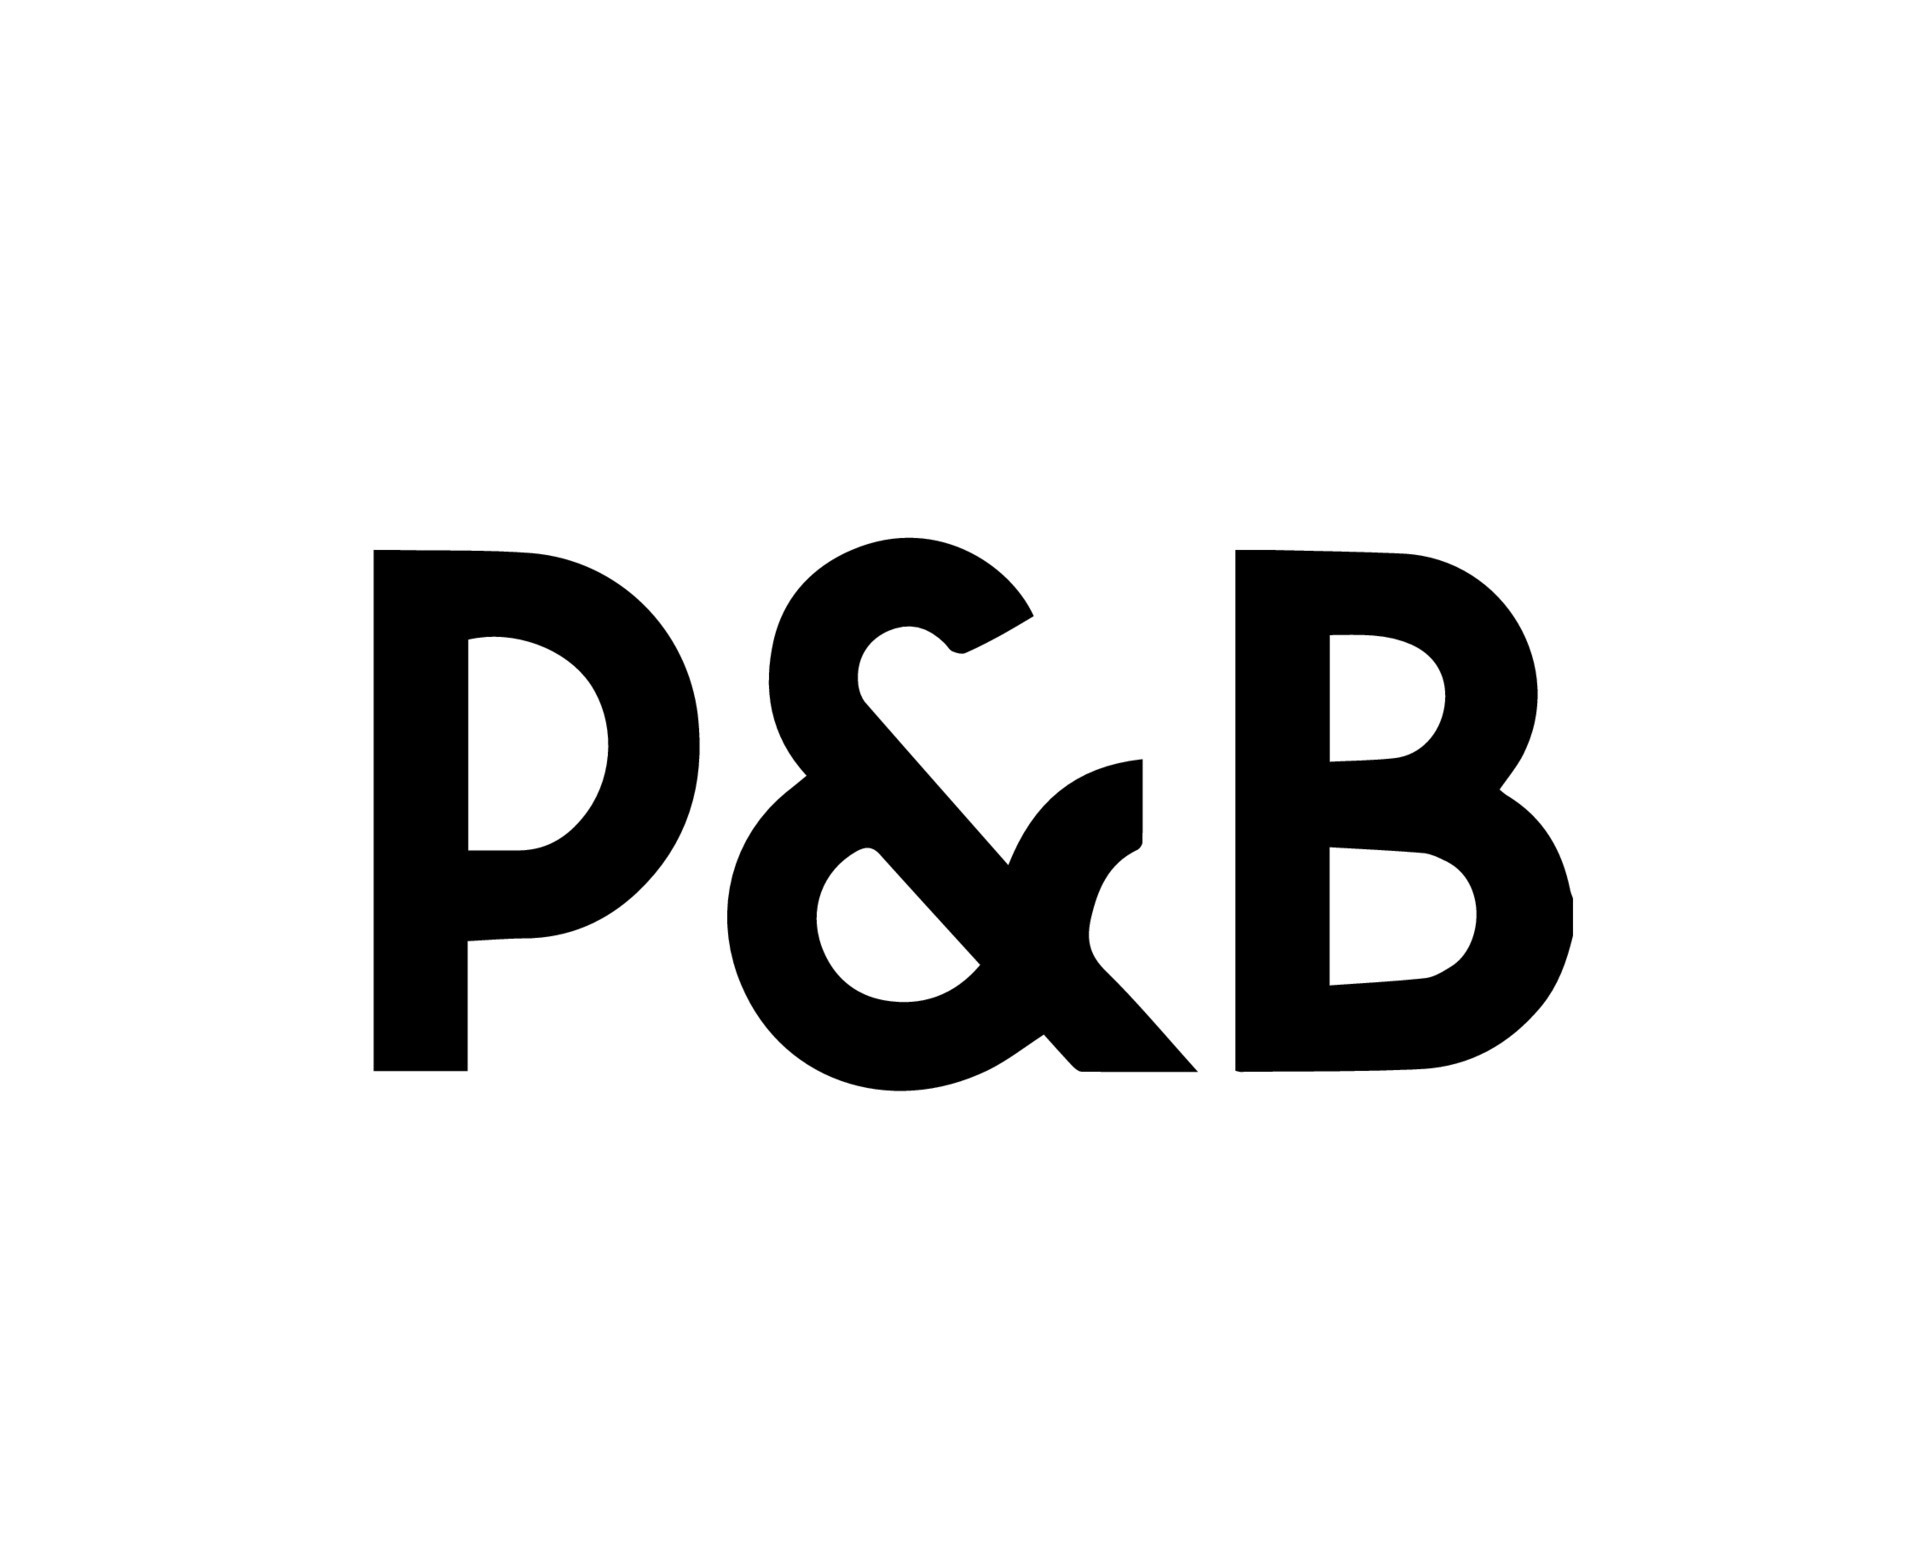 Pull And Bear Brand Symbol Logo Black Clothes Design Icon Abstract